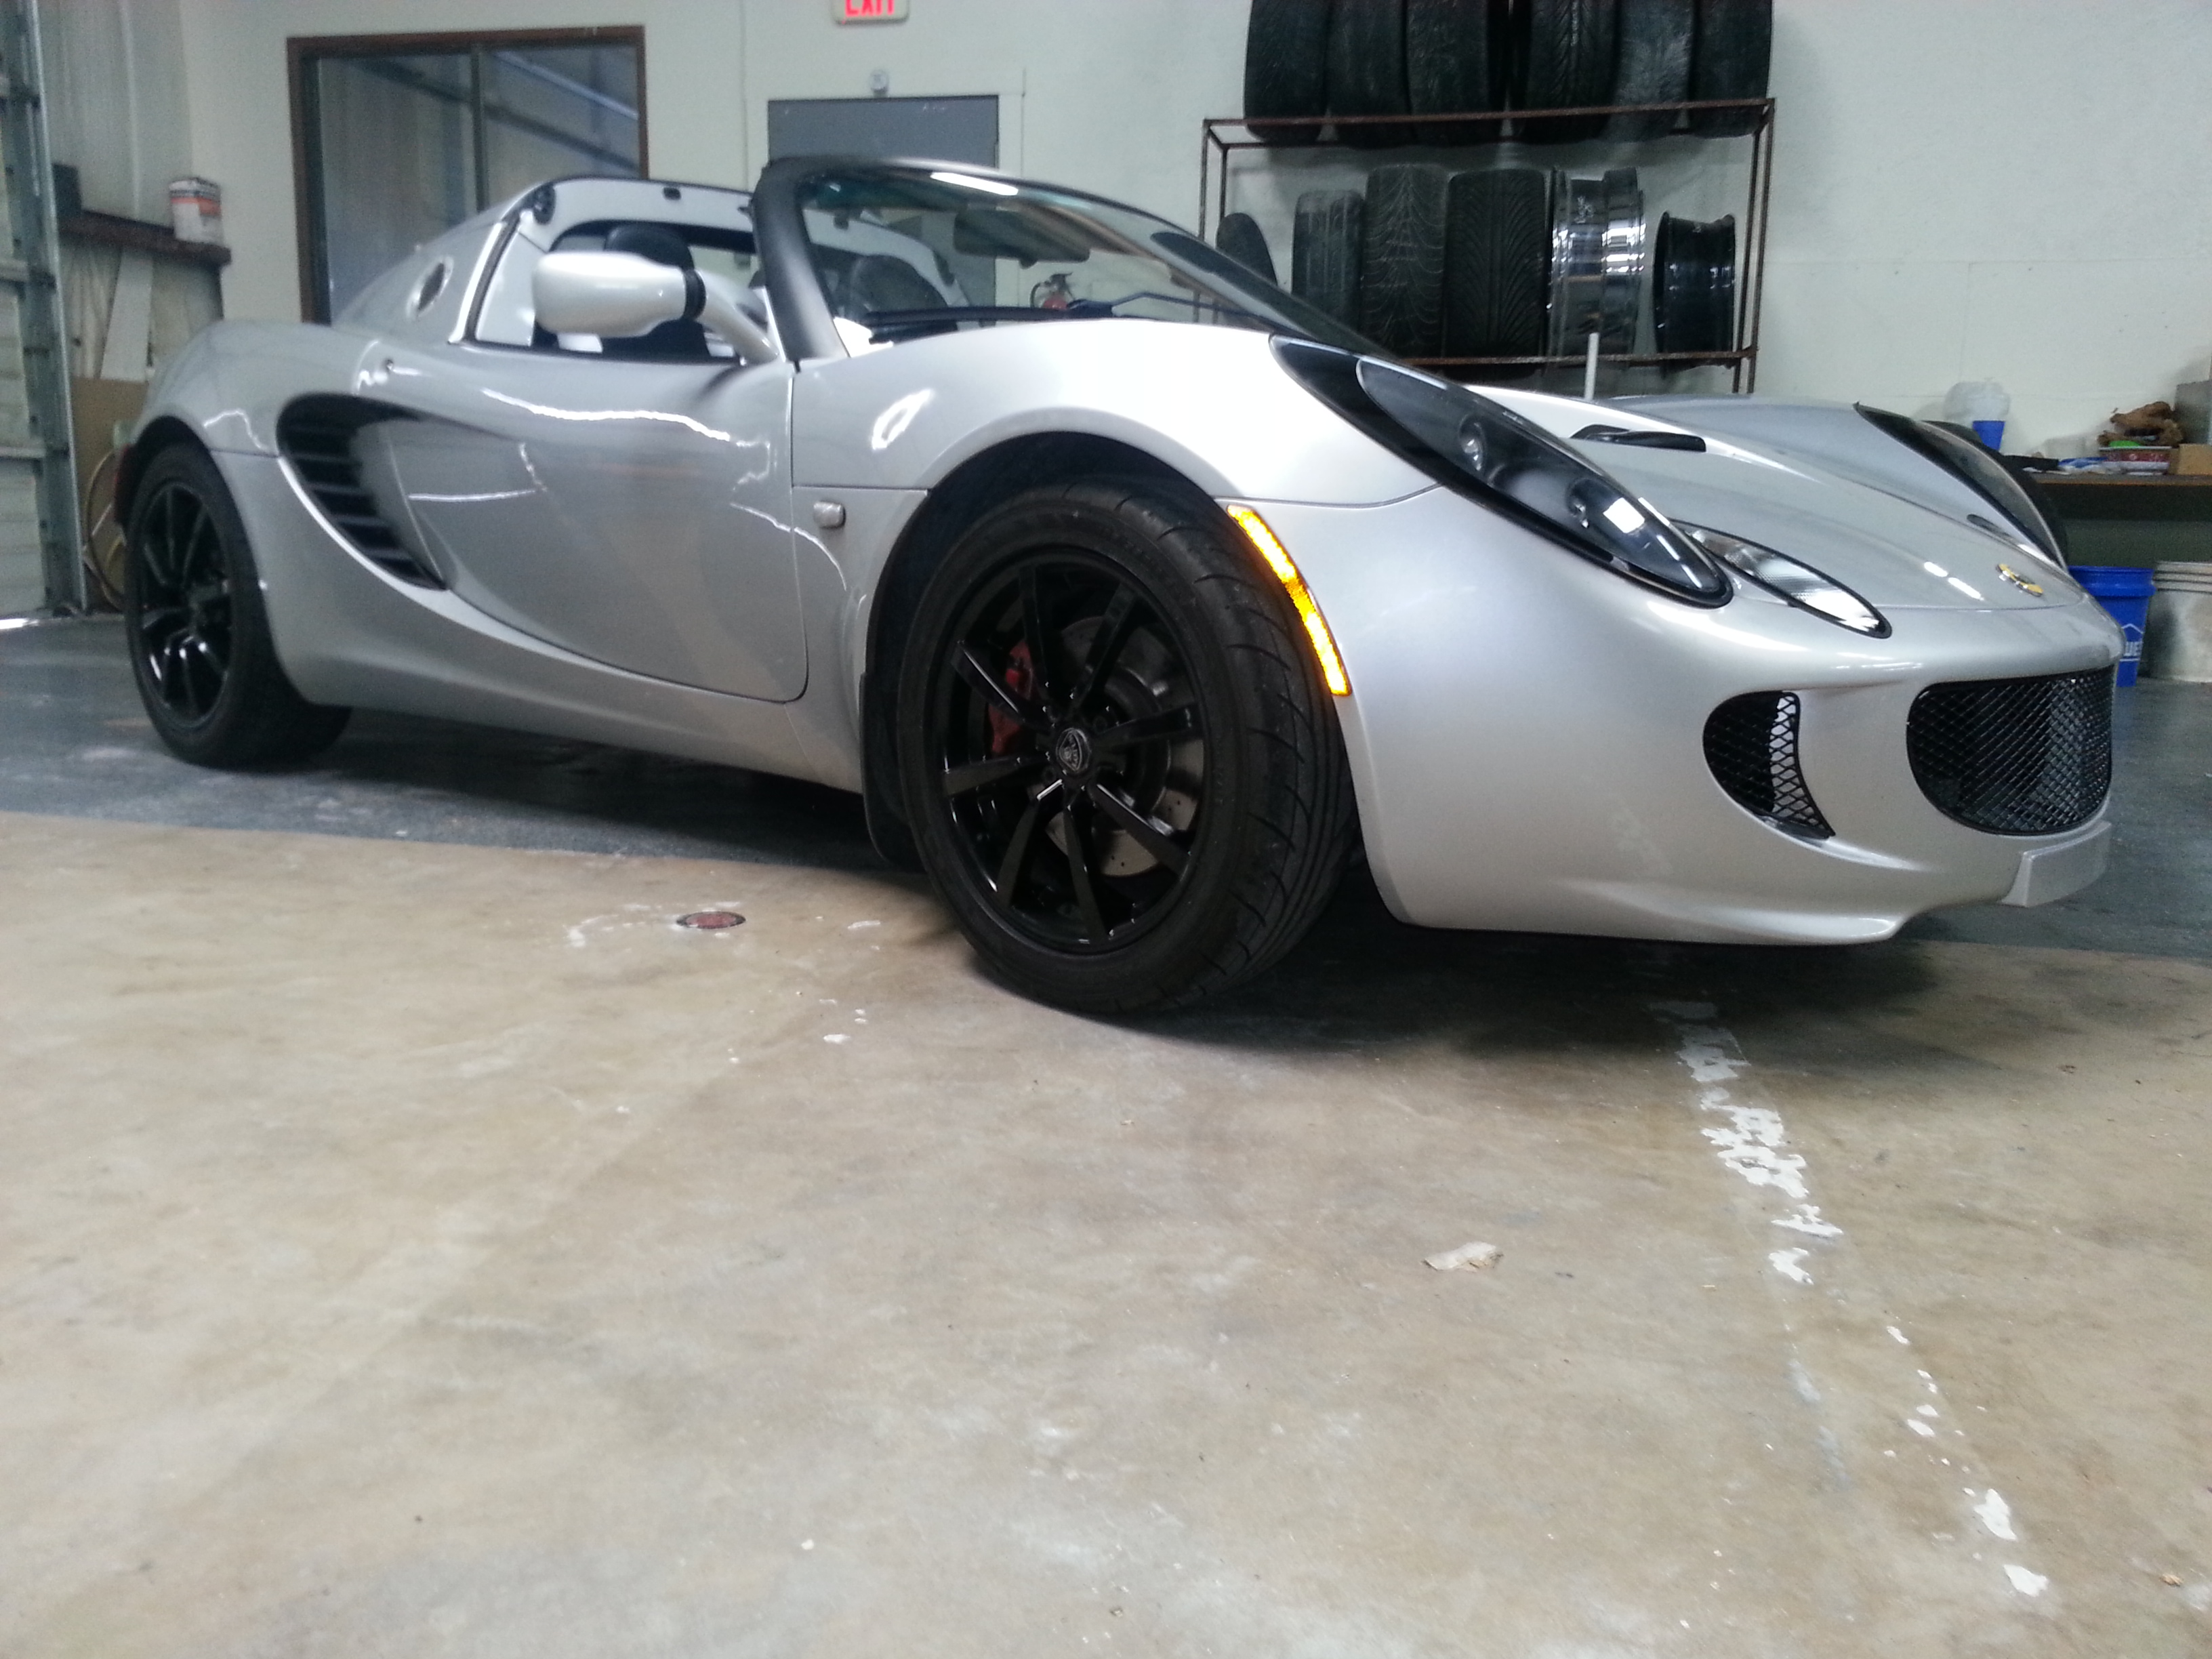 David Came In and wanted his Lotus To have a more custom look so we repaired and powdercoated his rims with a High Gloss black Here the final Product